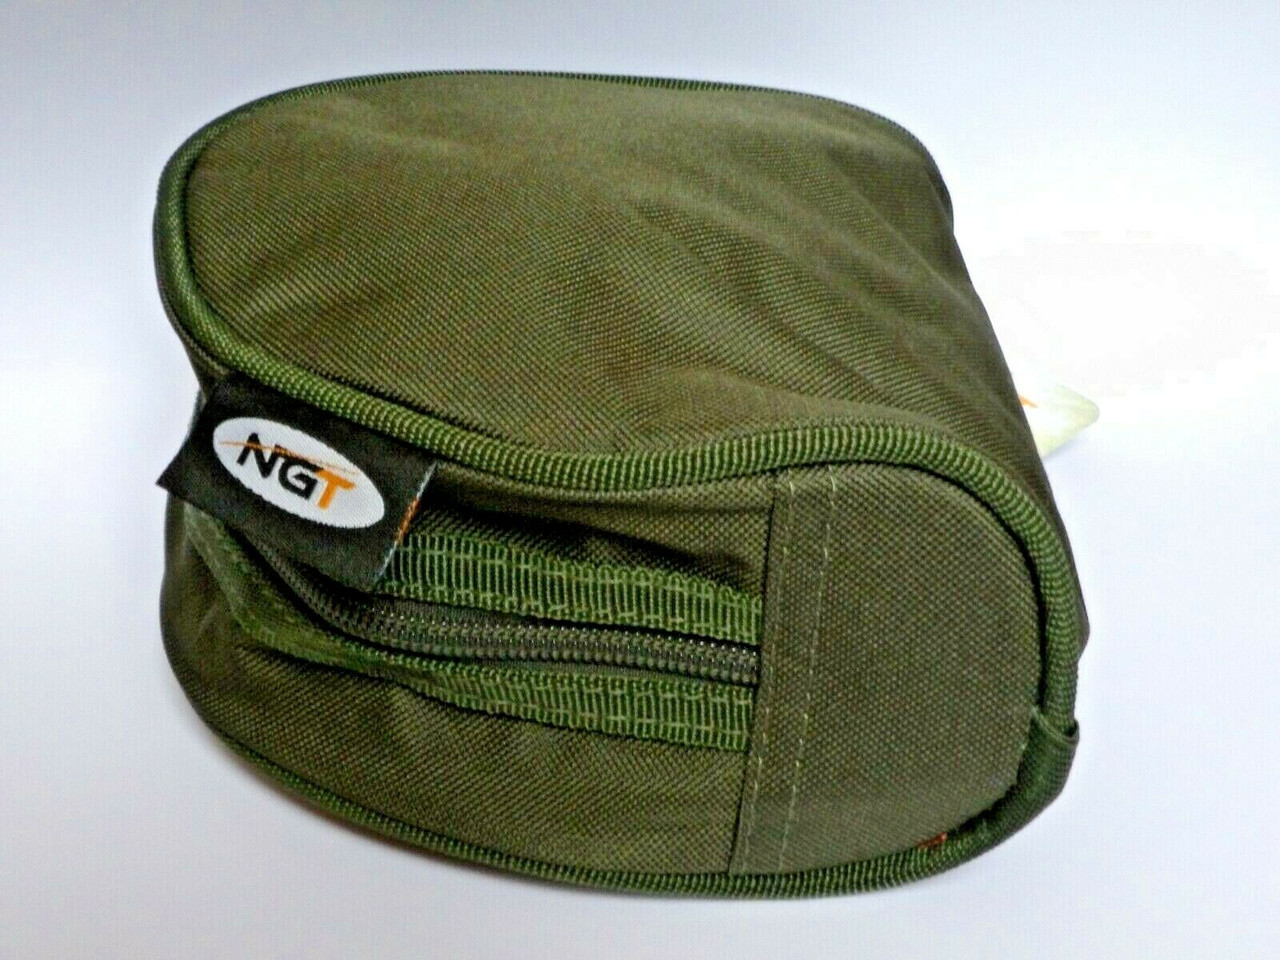 5x NGT Deluxe Green Big Pit Reel Case - Fishing in Tackle